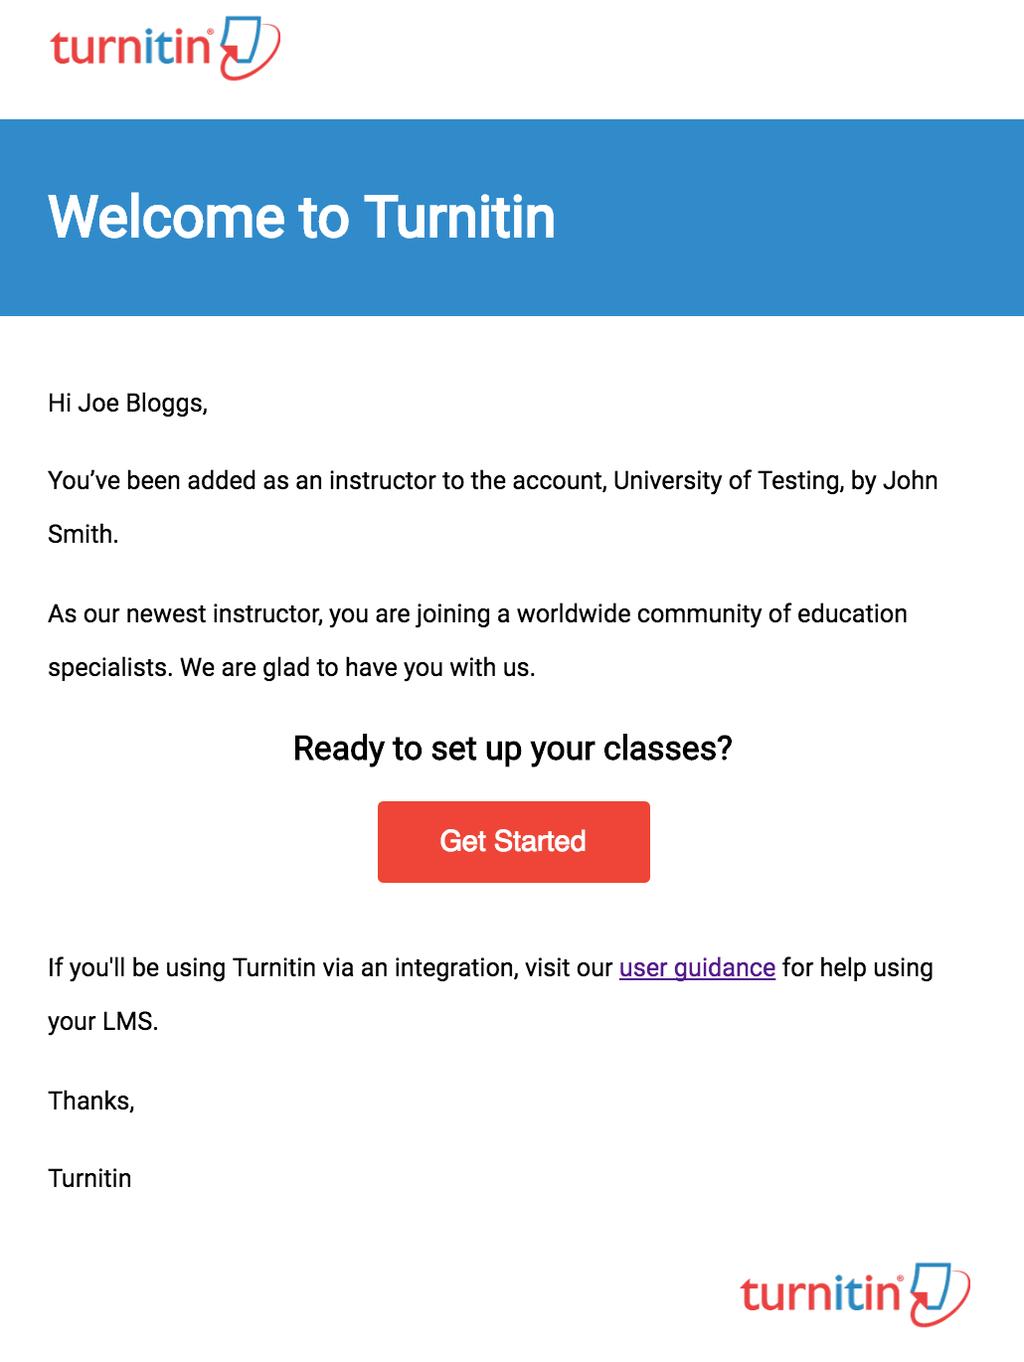 2. You will be directed to a quick 4-step introduction to Turnitin, with useful guidance to familiarize you with class and assignment creation, as well as adding your students.